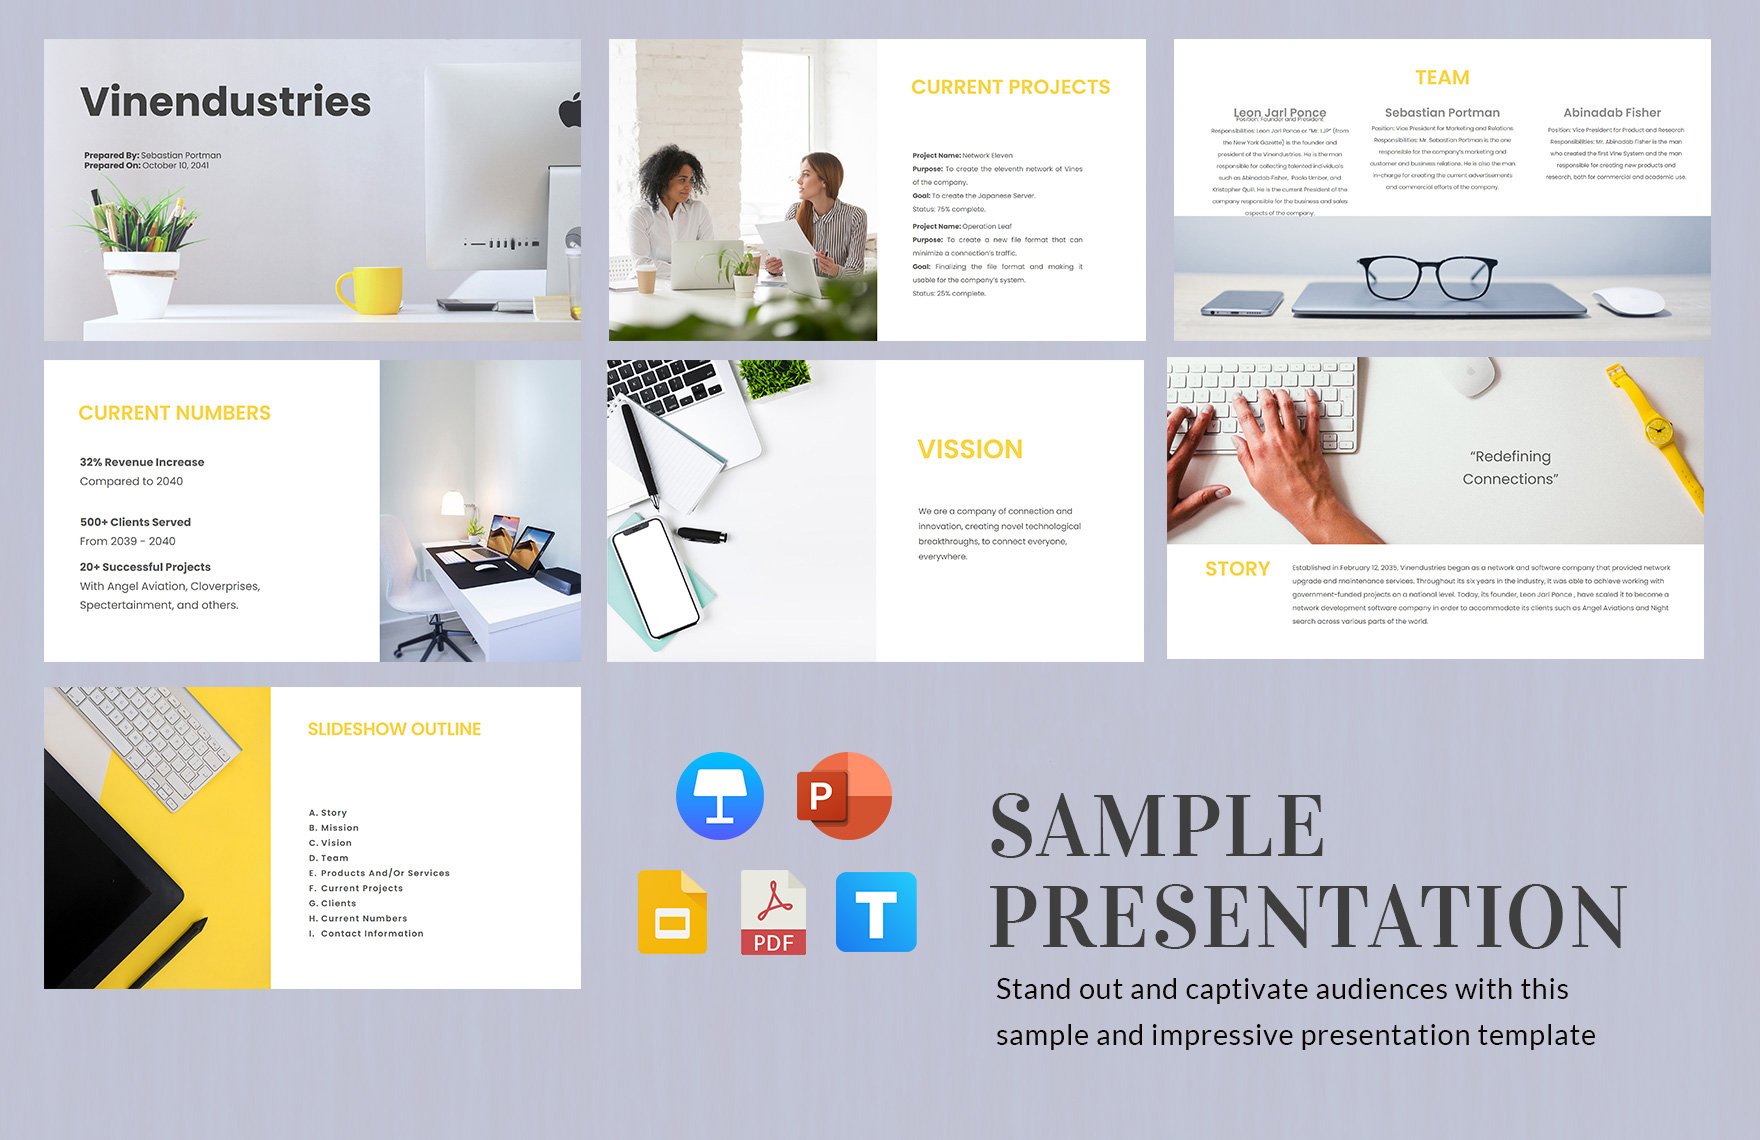 Presentation Template in PDF - FREE Download